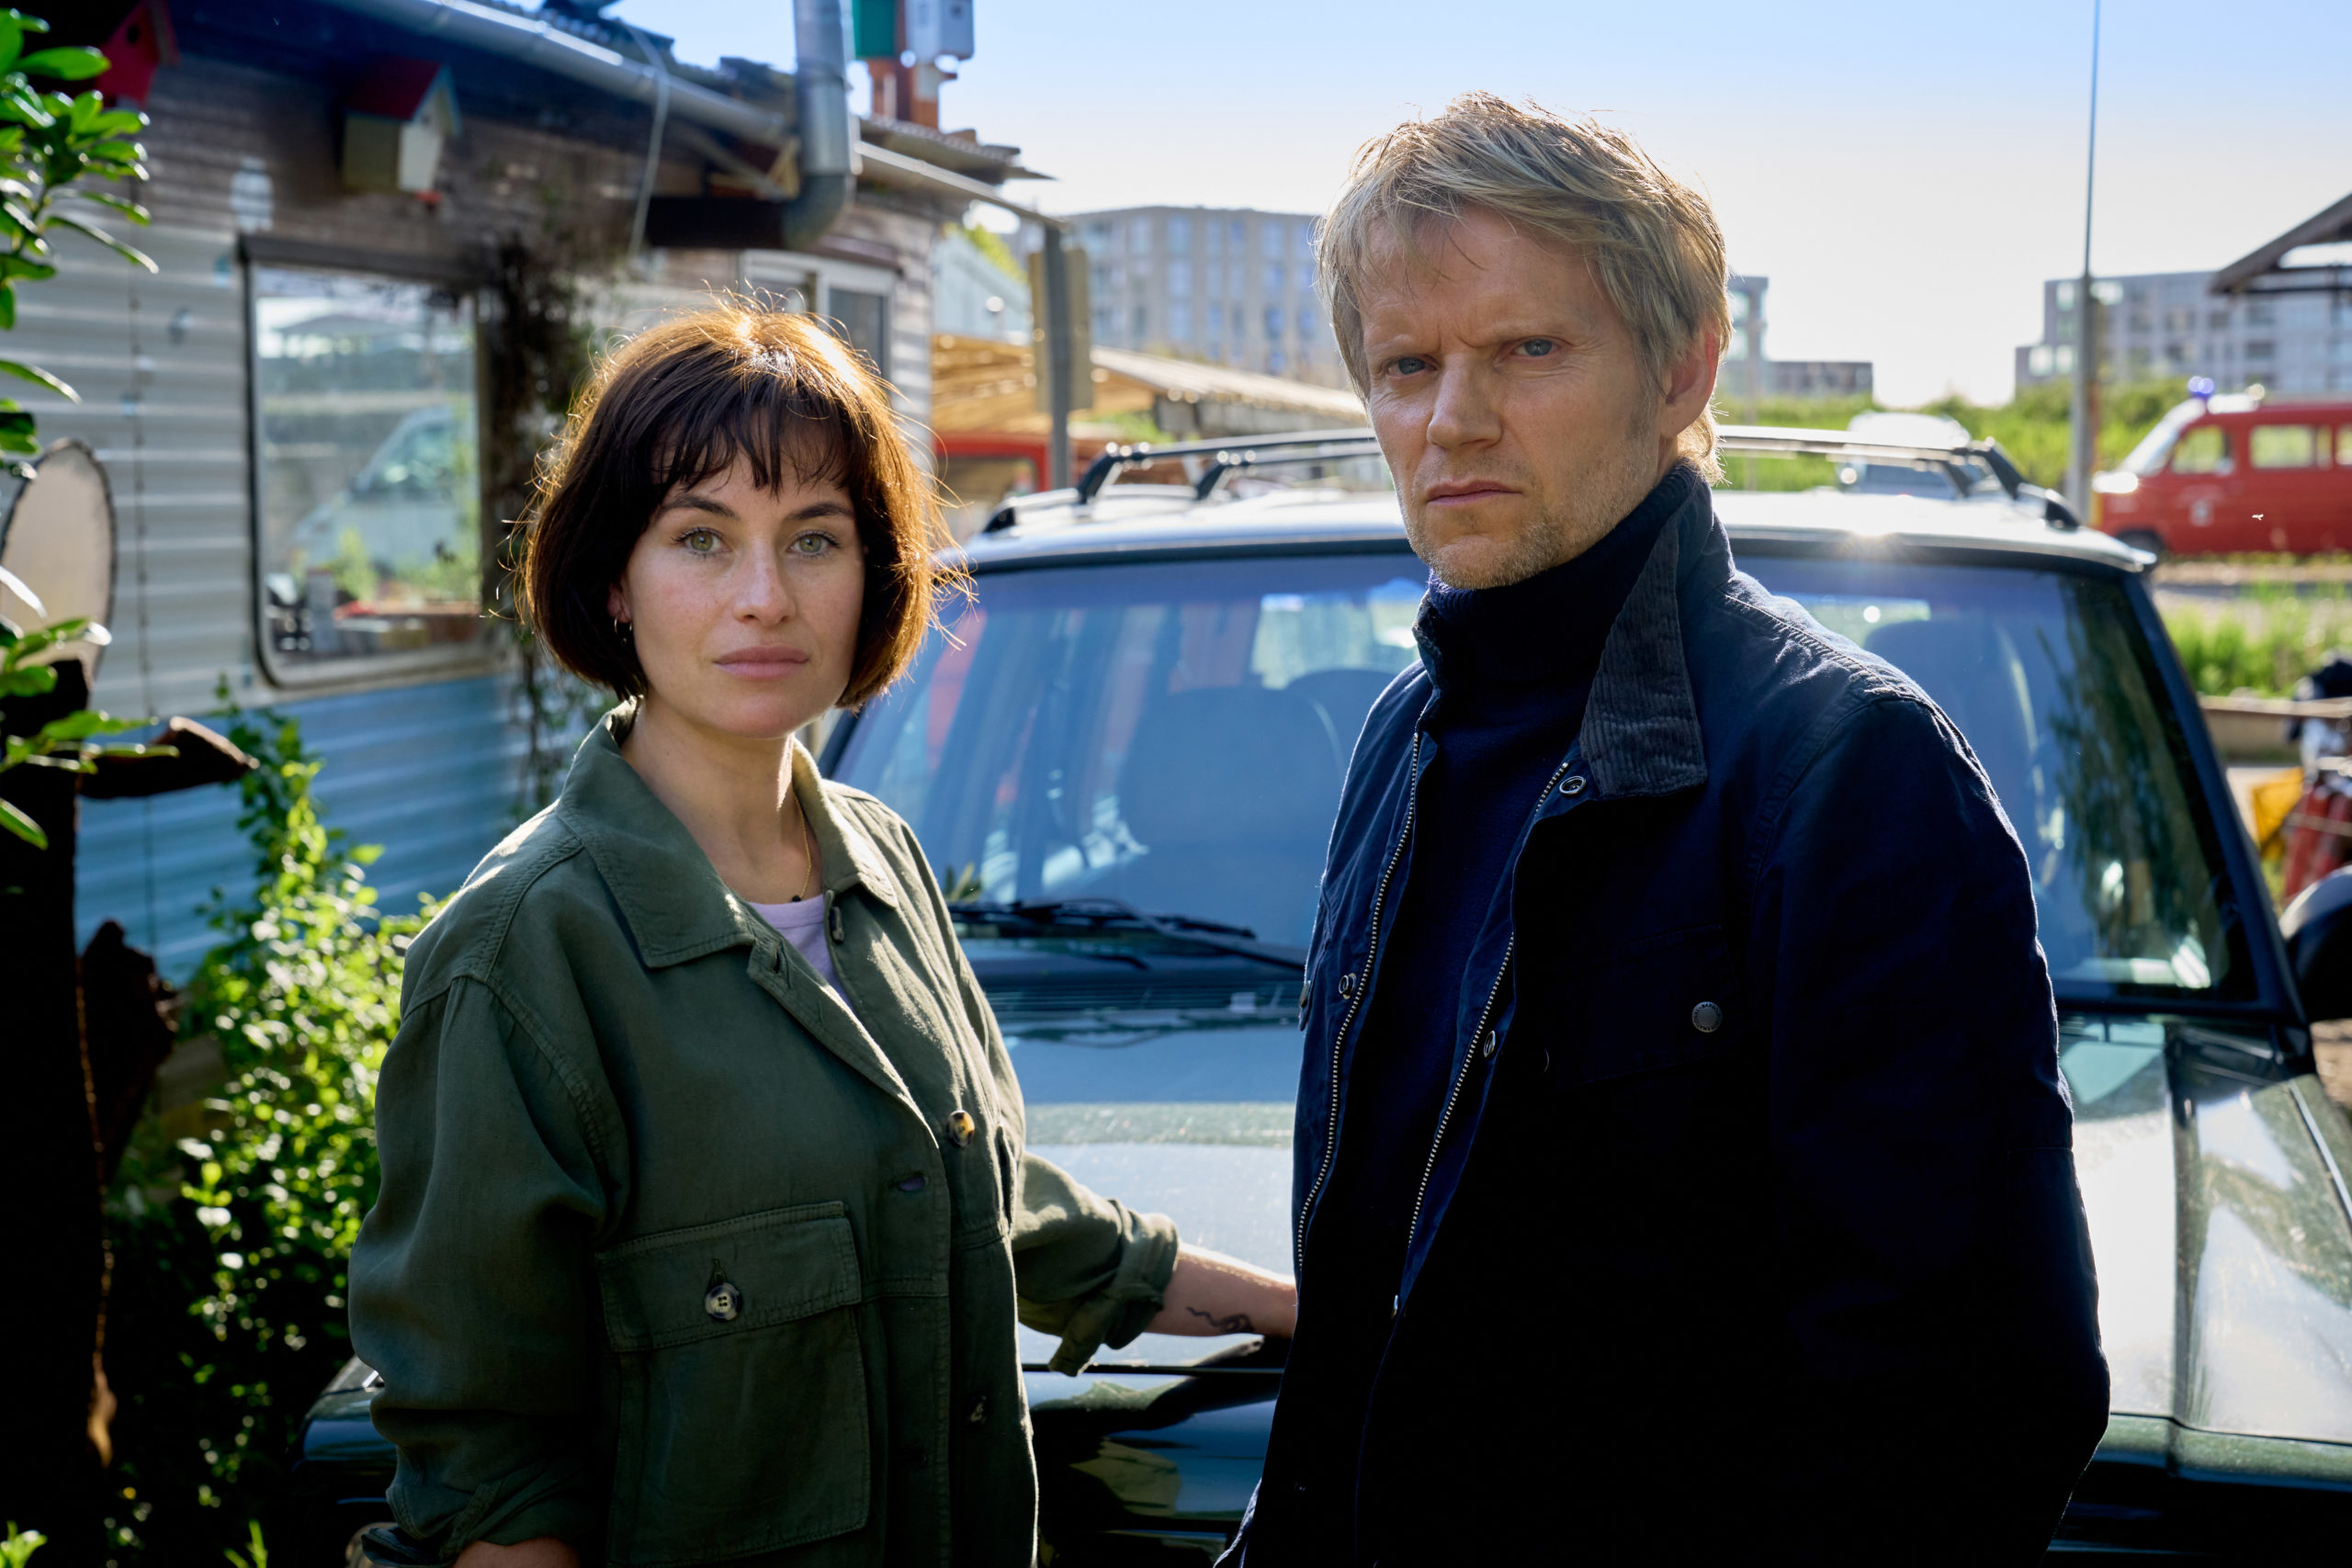 MASTERPIECE Mystery!
"Van der Valk" Season 2

Episode One, “Plague in Amsterdam”
Sunday, September 25, 2022; 9-11pm ET on PBS
Dutch detective Van der Valk is called in to investigate the grisly and theatrical murder of a lawyer. As a cryptic note discovered within her jacket
alludes to further murders, Van der Valk and his team must race to uncover the truth before the killer can strike again.

Shown from left to right: Maimie McCoy as Lucienne Hassel and Marc Warren as Piet Van der Valk

For editorial use only.

© Company Pictures, NL Films &amp; A3MI